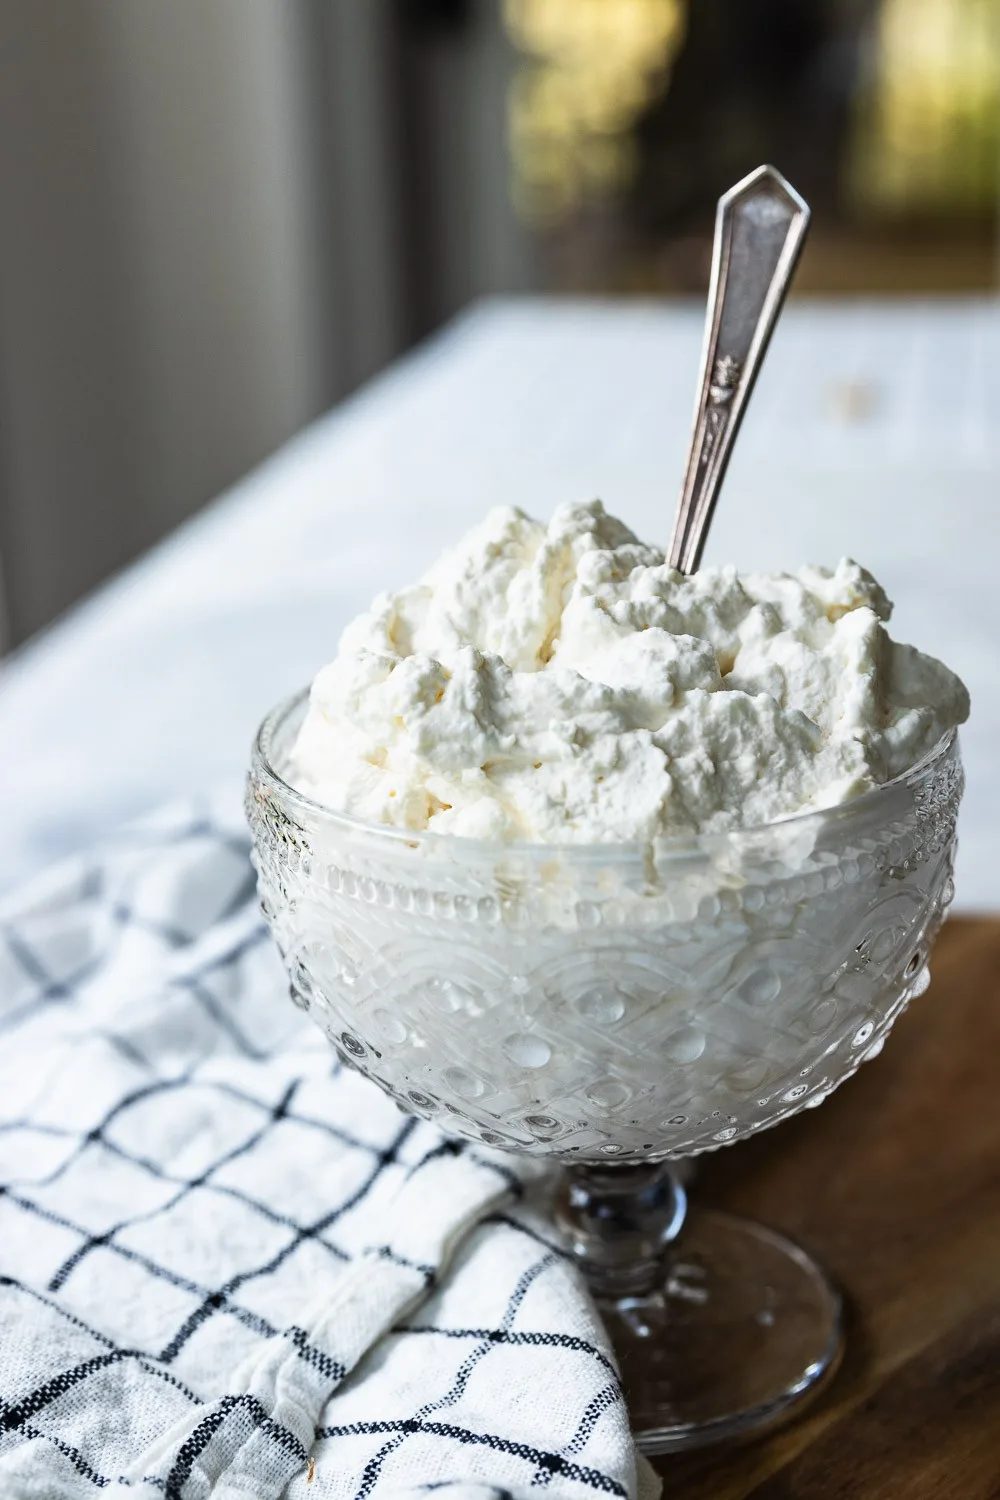 A bowl of stabilized whipped cream